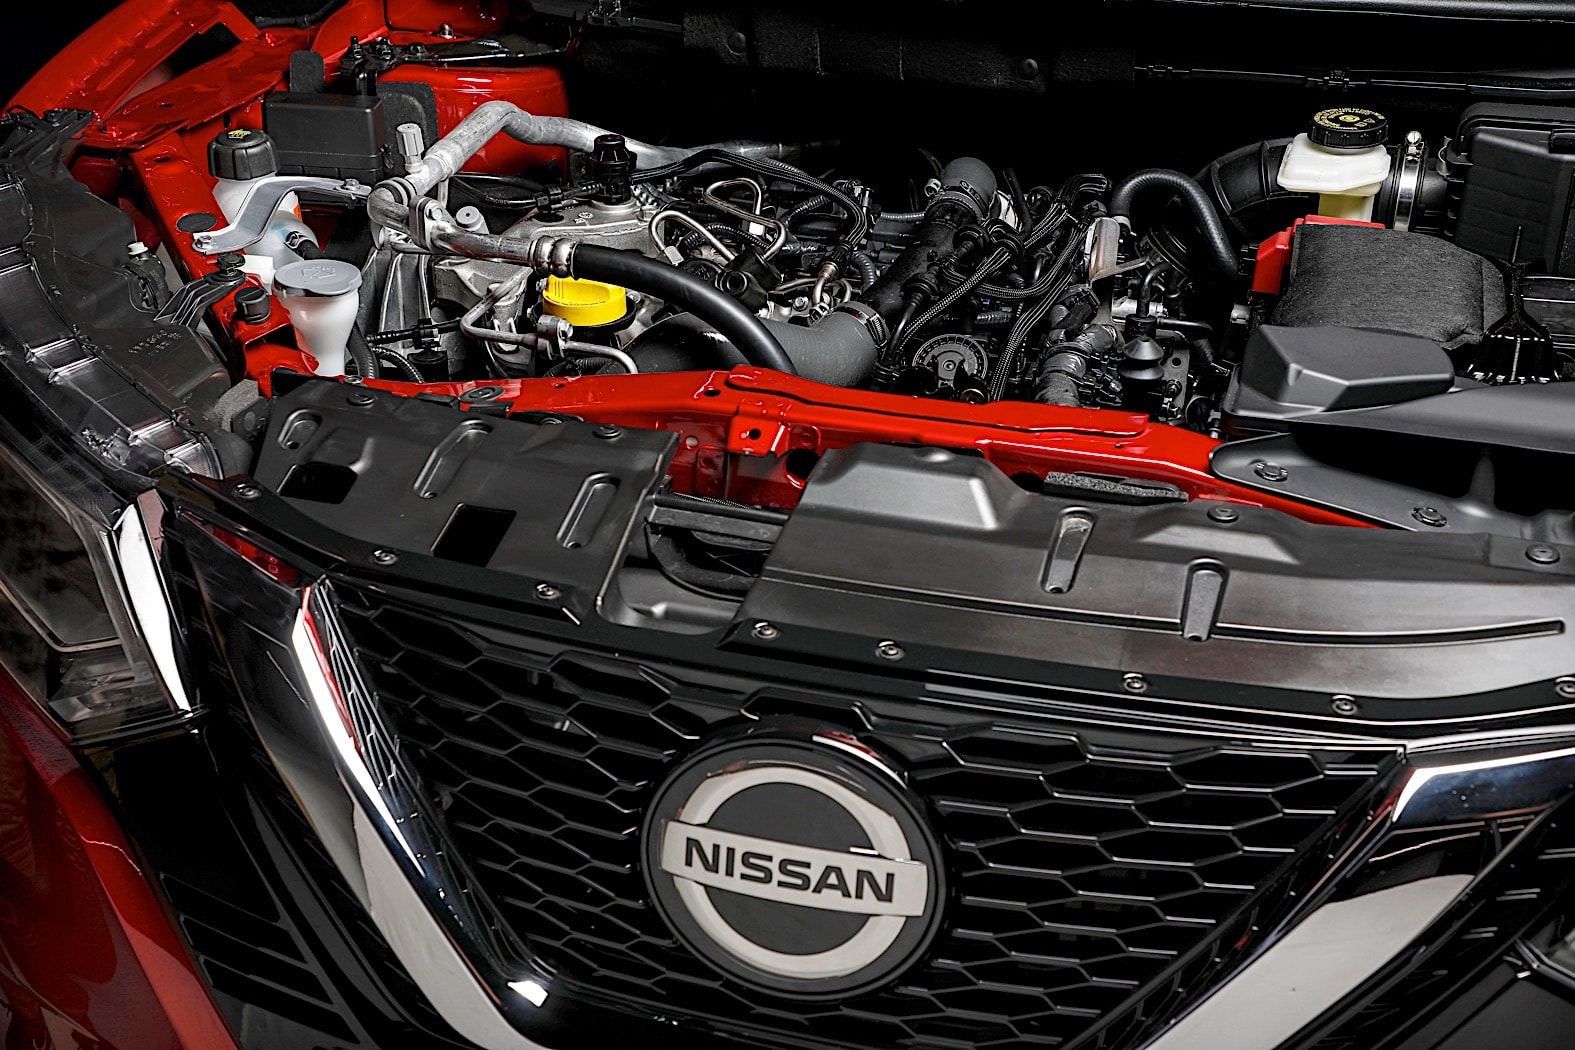 Nissan Updates Qashqai With Mercedes Engine, New Transmission And Infotainment - autoevolution